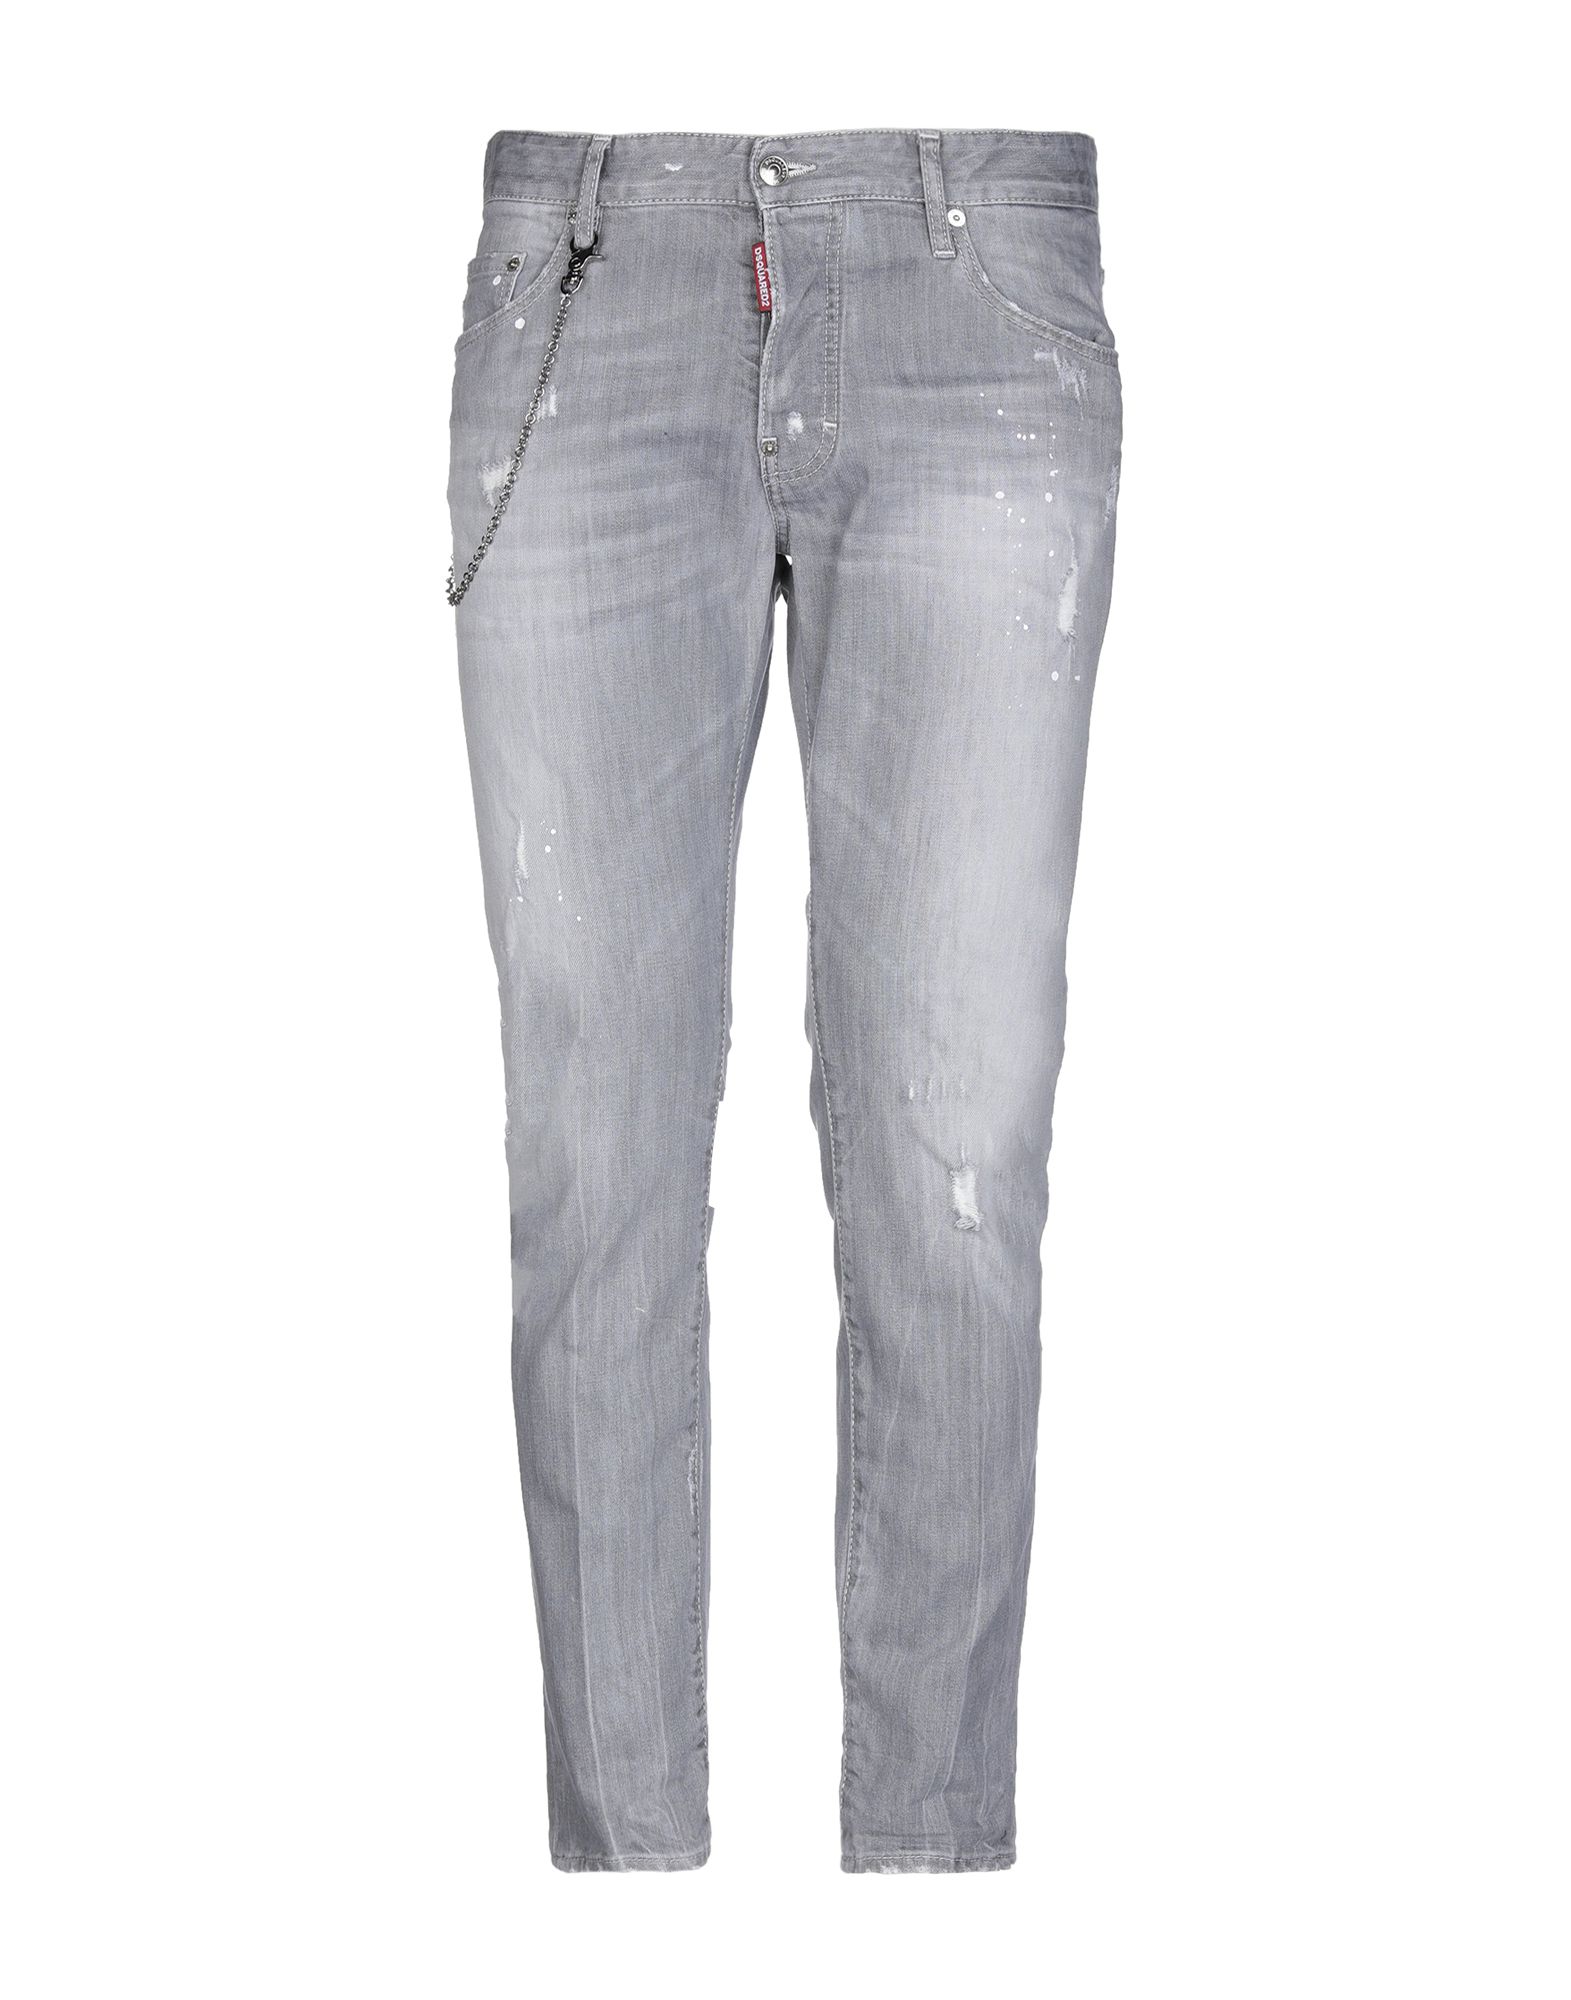 jeans dsquared2 yoox